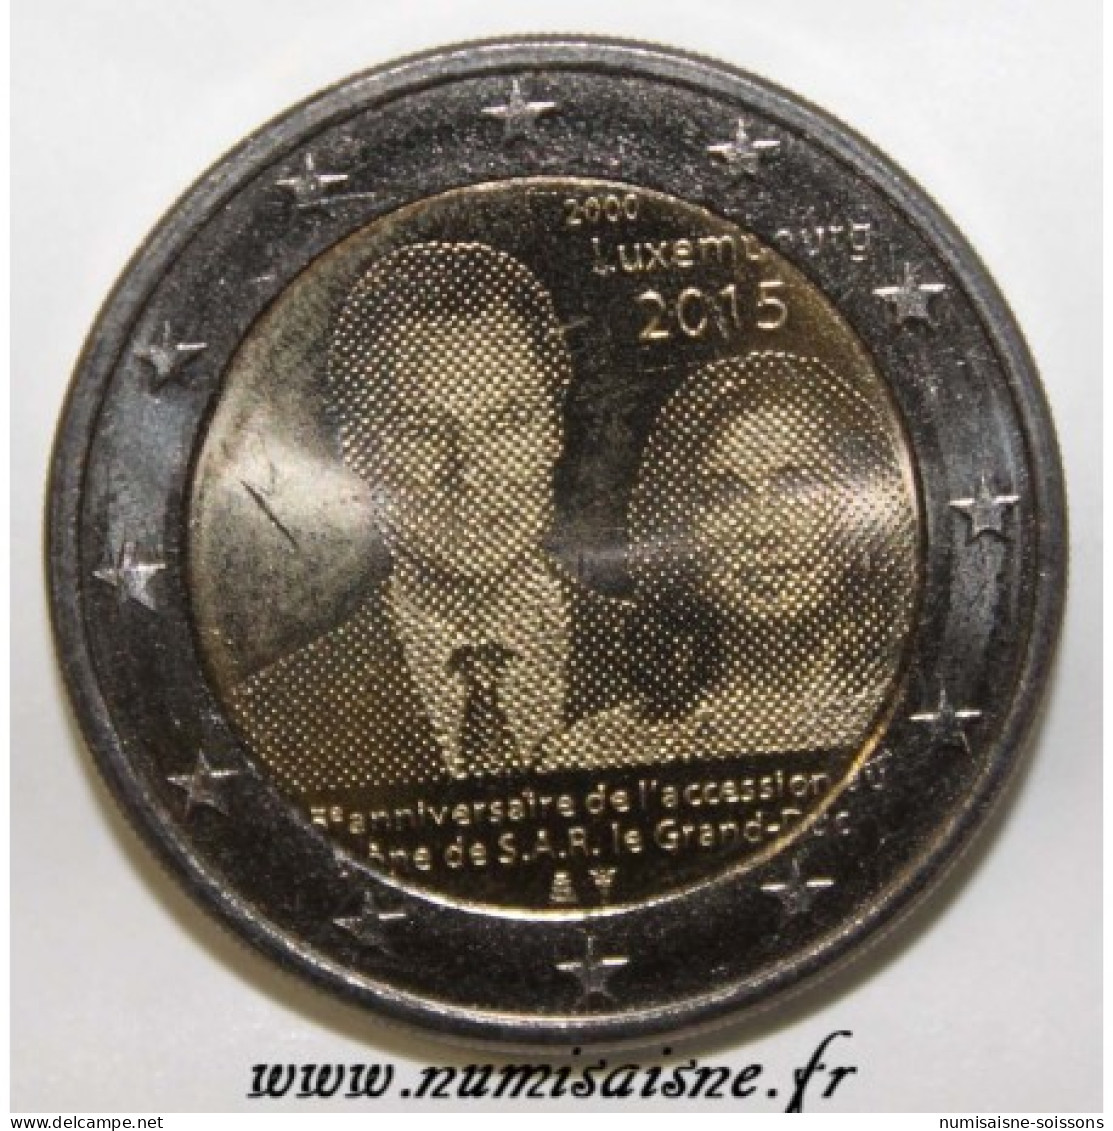 LUXEMBOURG - 2 EURO 2012 - MARIAGE DU GRAND DUC GUILLAUME - SPL - Luxembourg